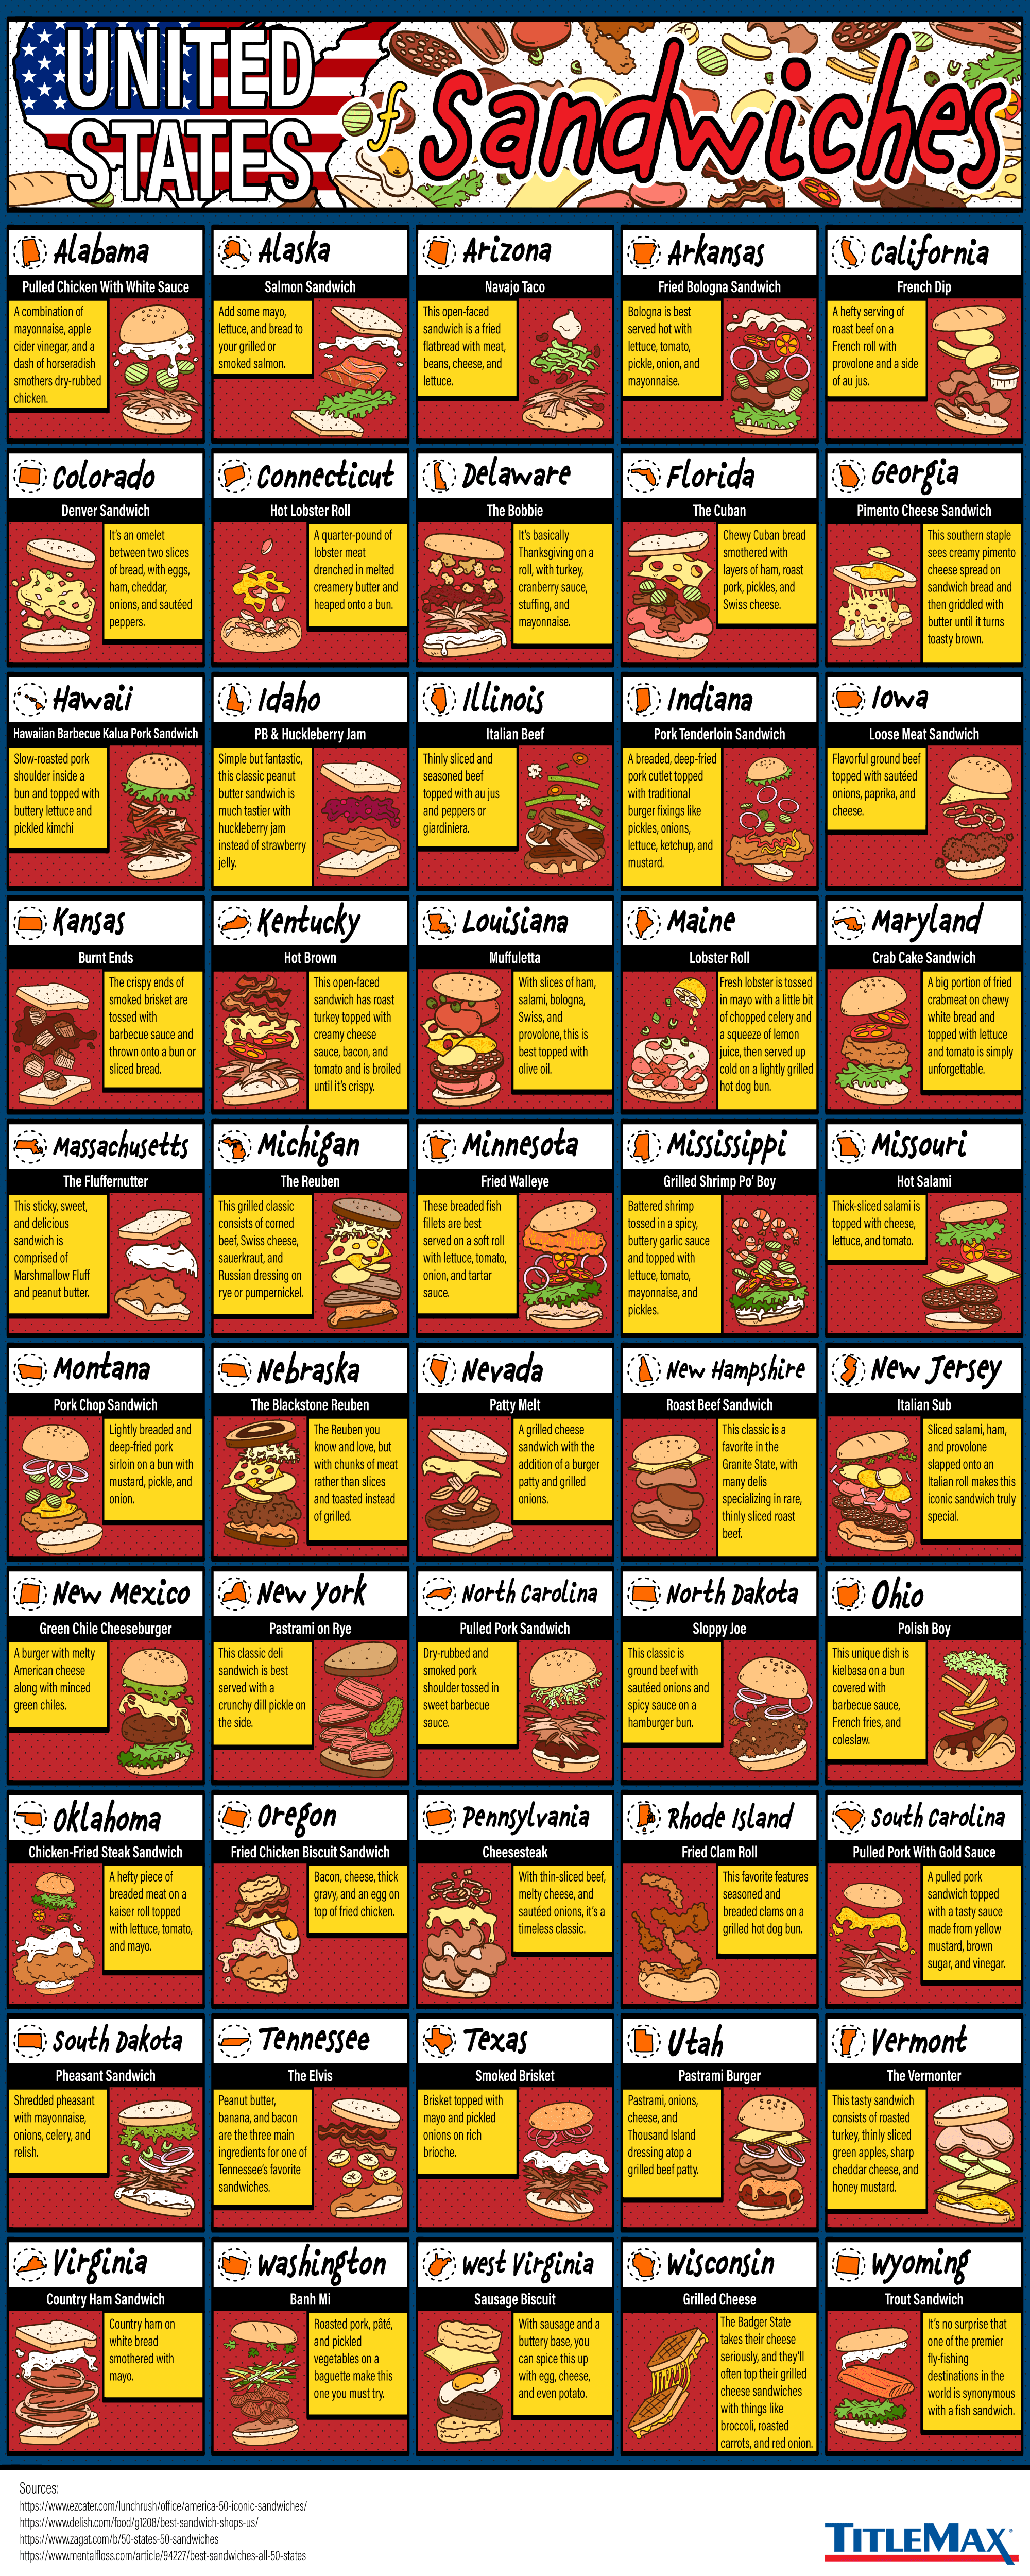 The United States of Sandwiches